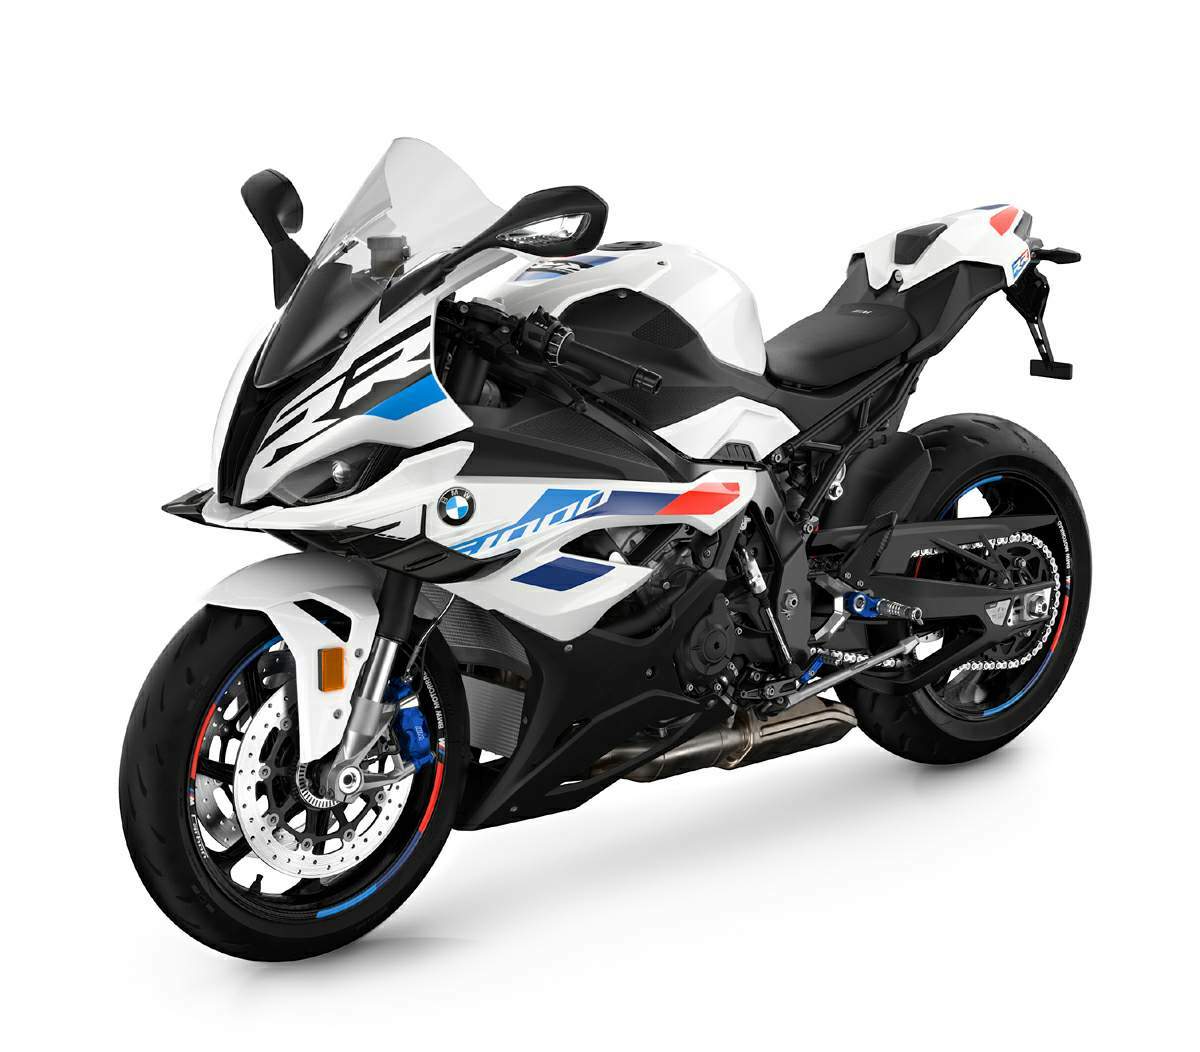 BMW S 1000RR technical specifications